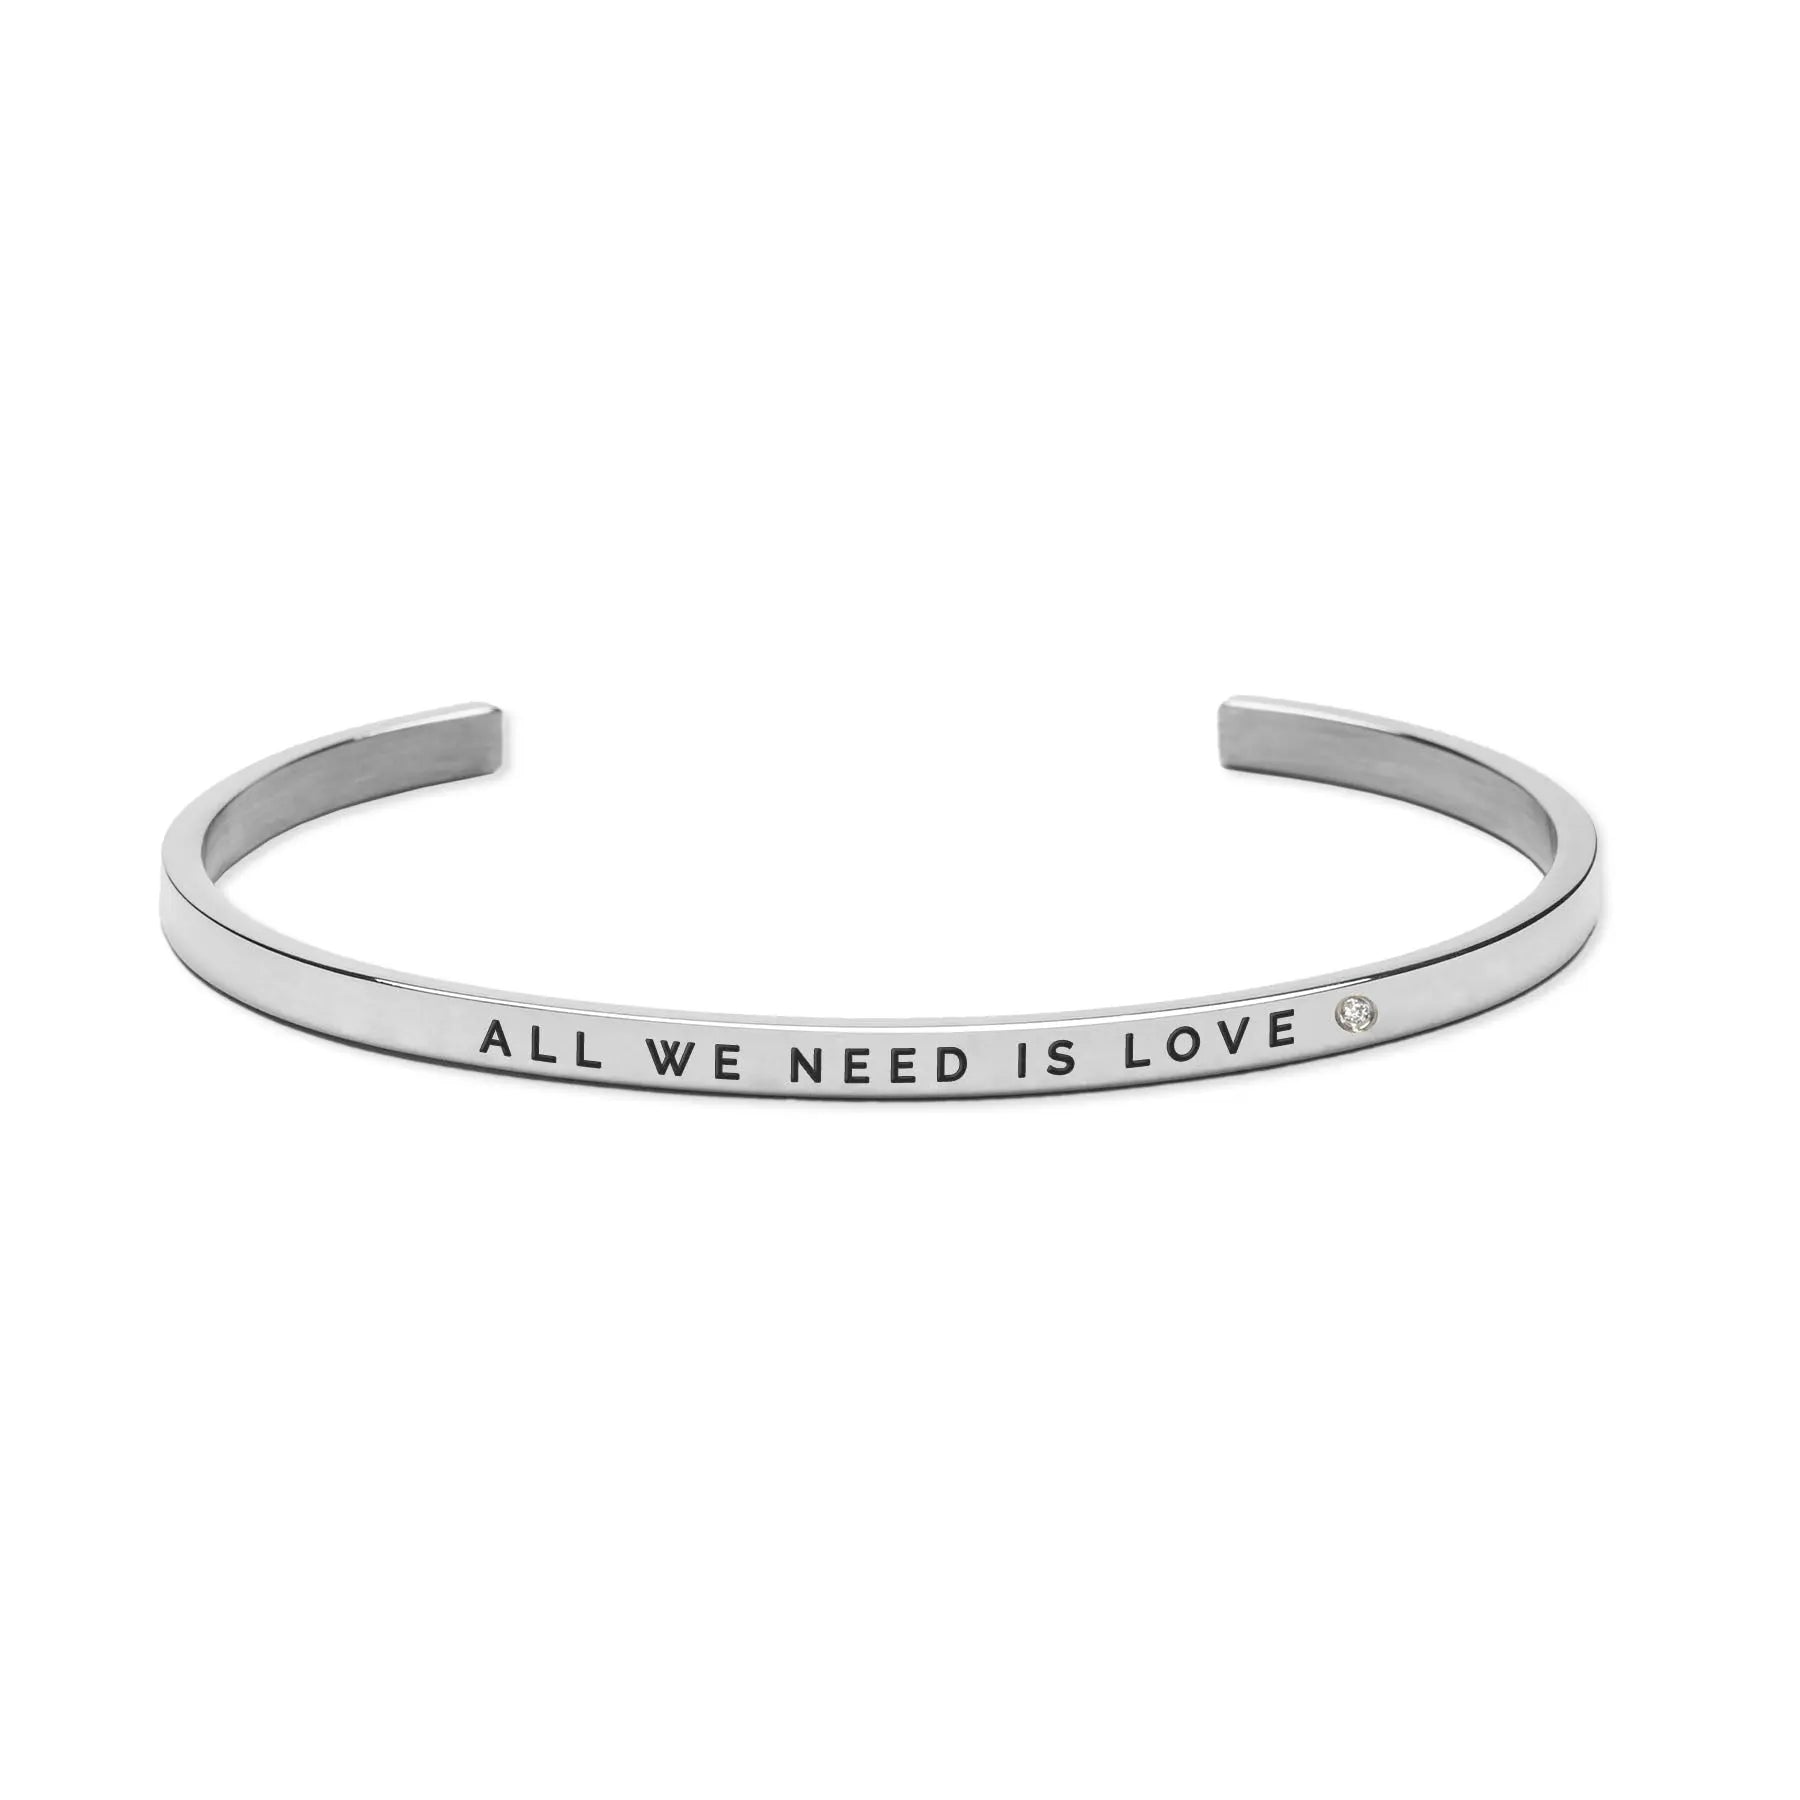 A silver bracelet with engraved words All We Need Is Love, symbolizing love's universal power and connection. Durable, adjustable, and elegantly crafted from stainless steel for lasting wear.